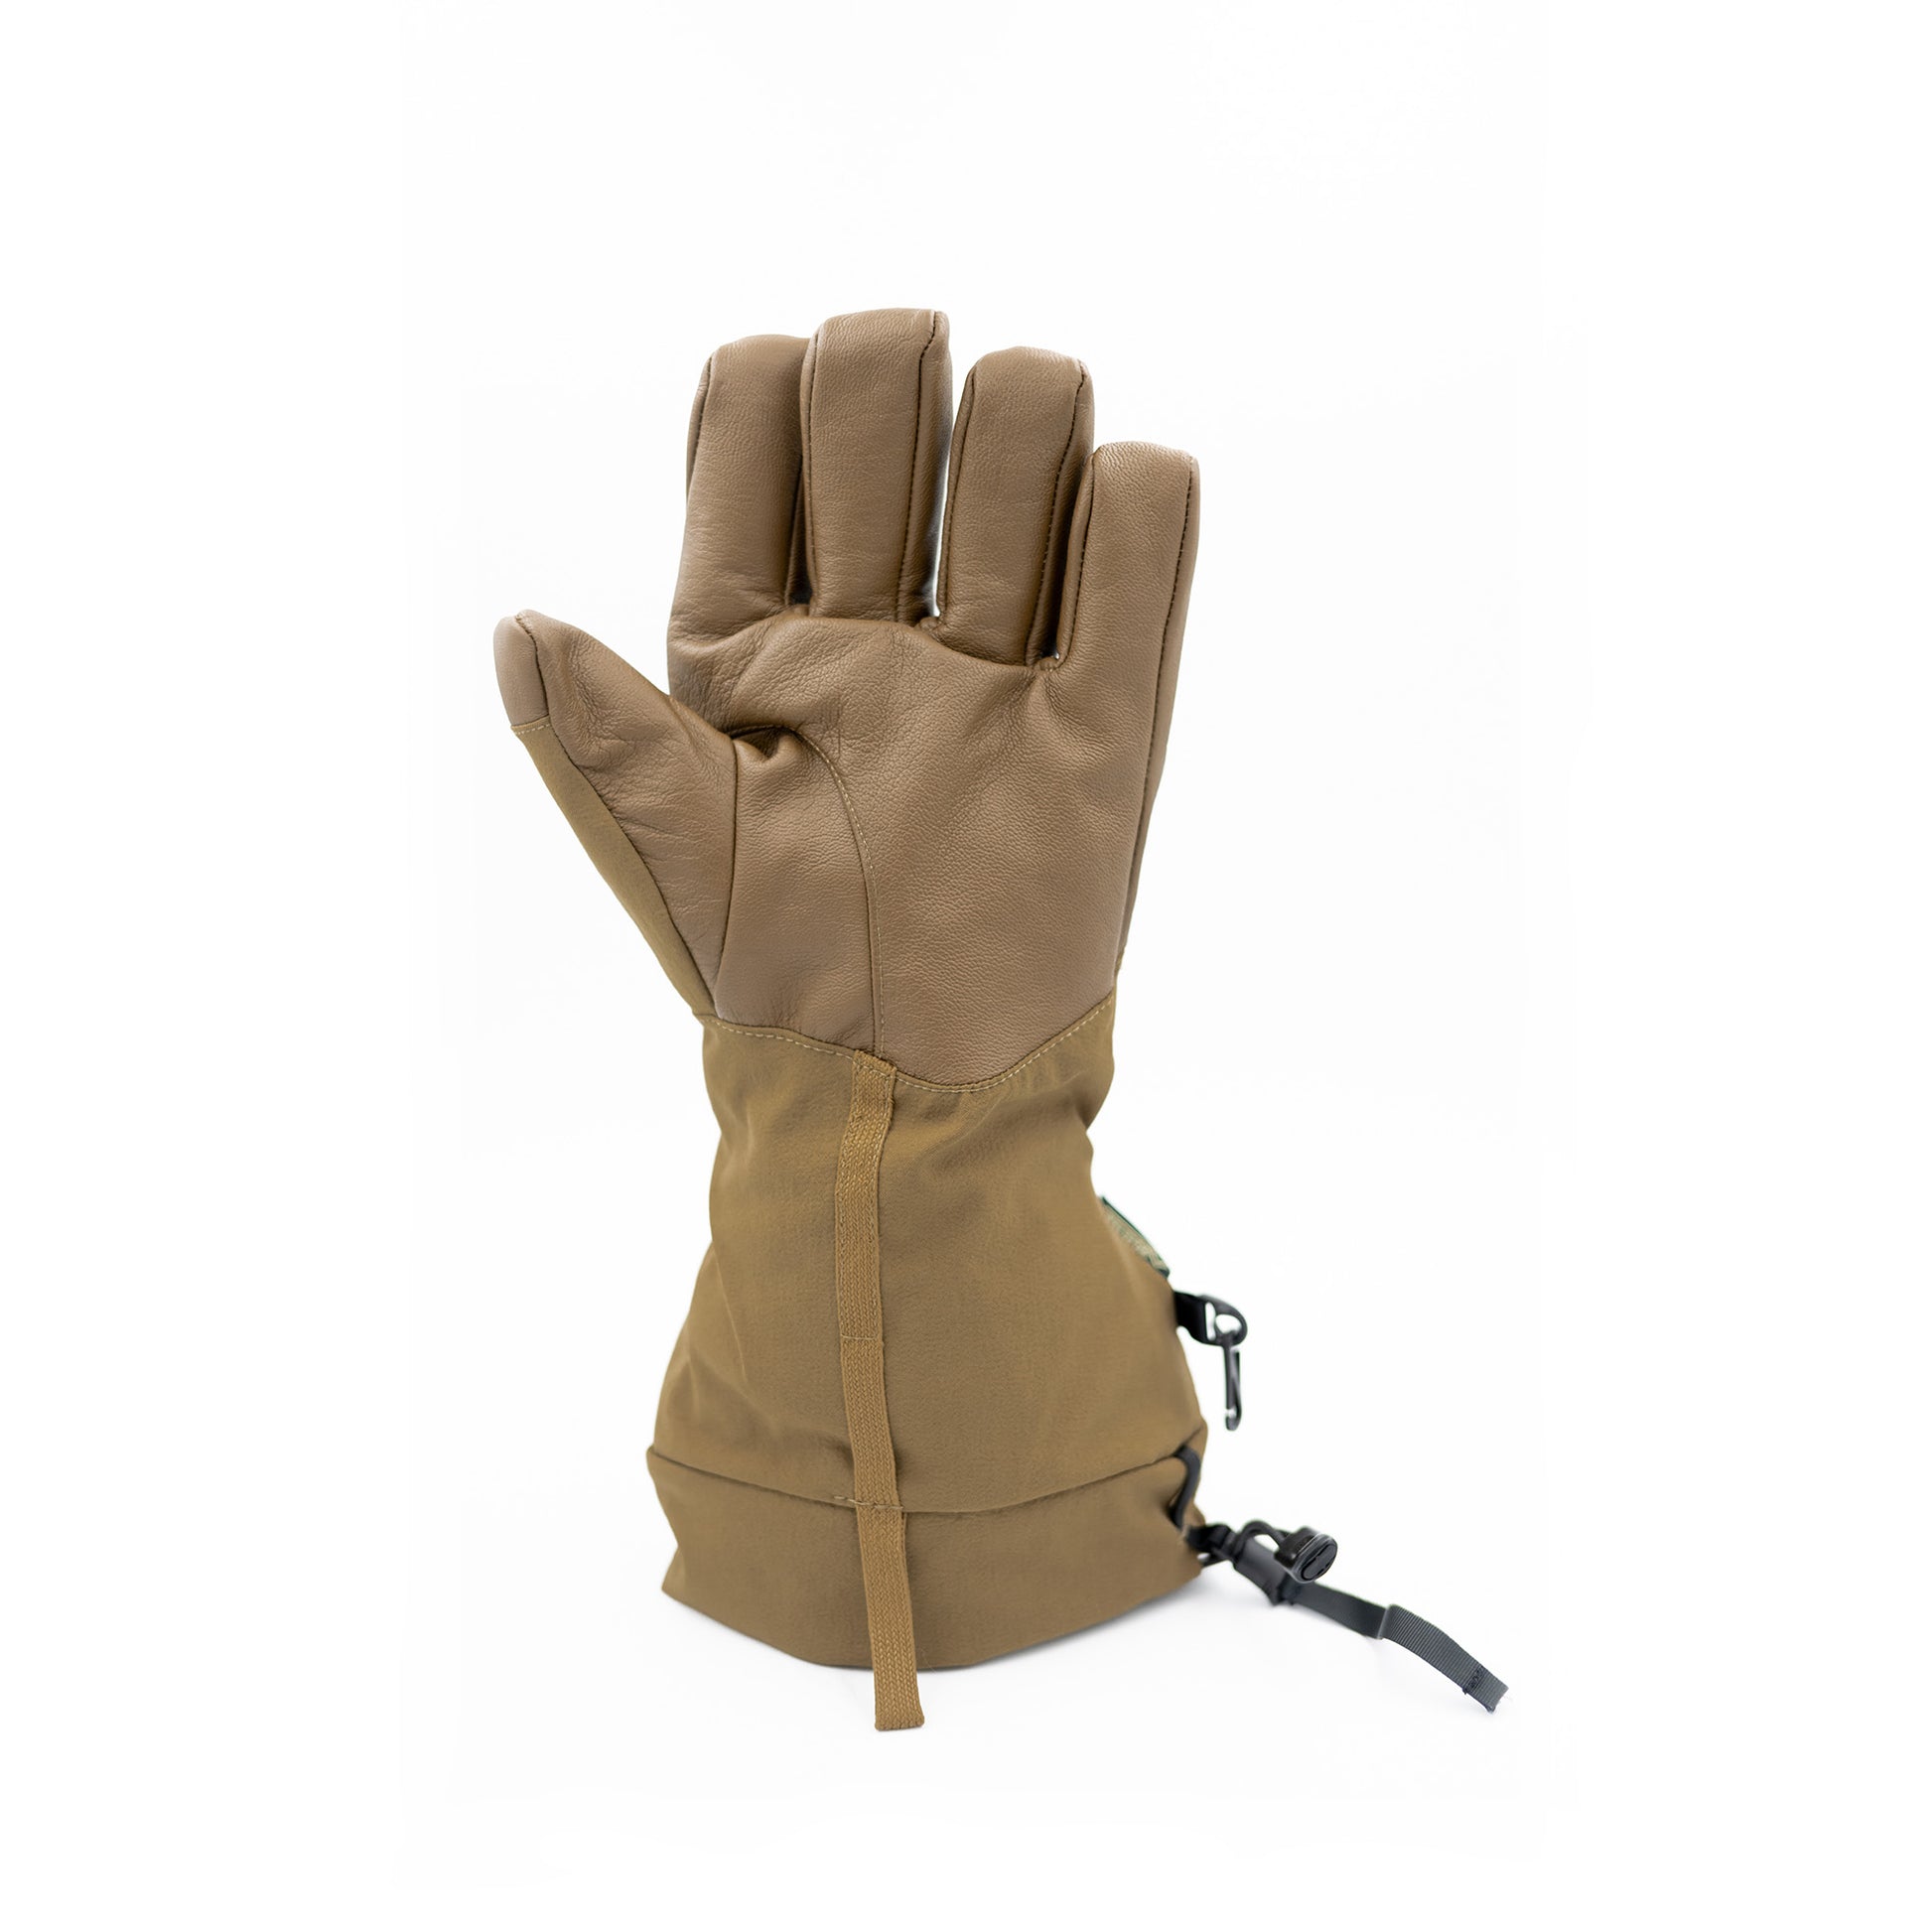 A pair of Mainers Rangeley Gloves on a white background.